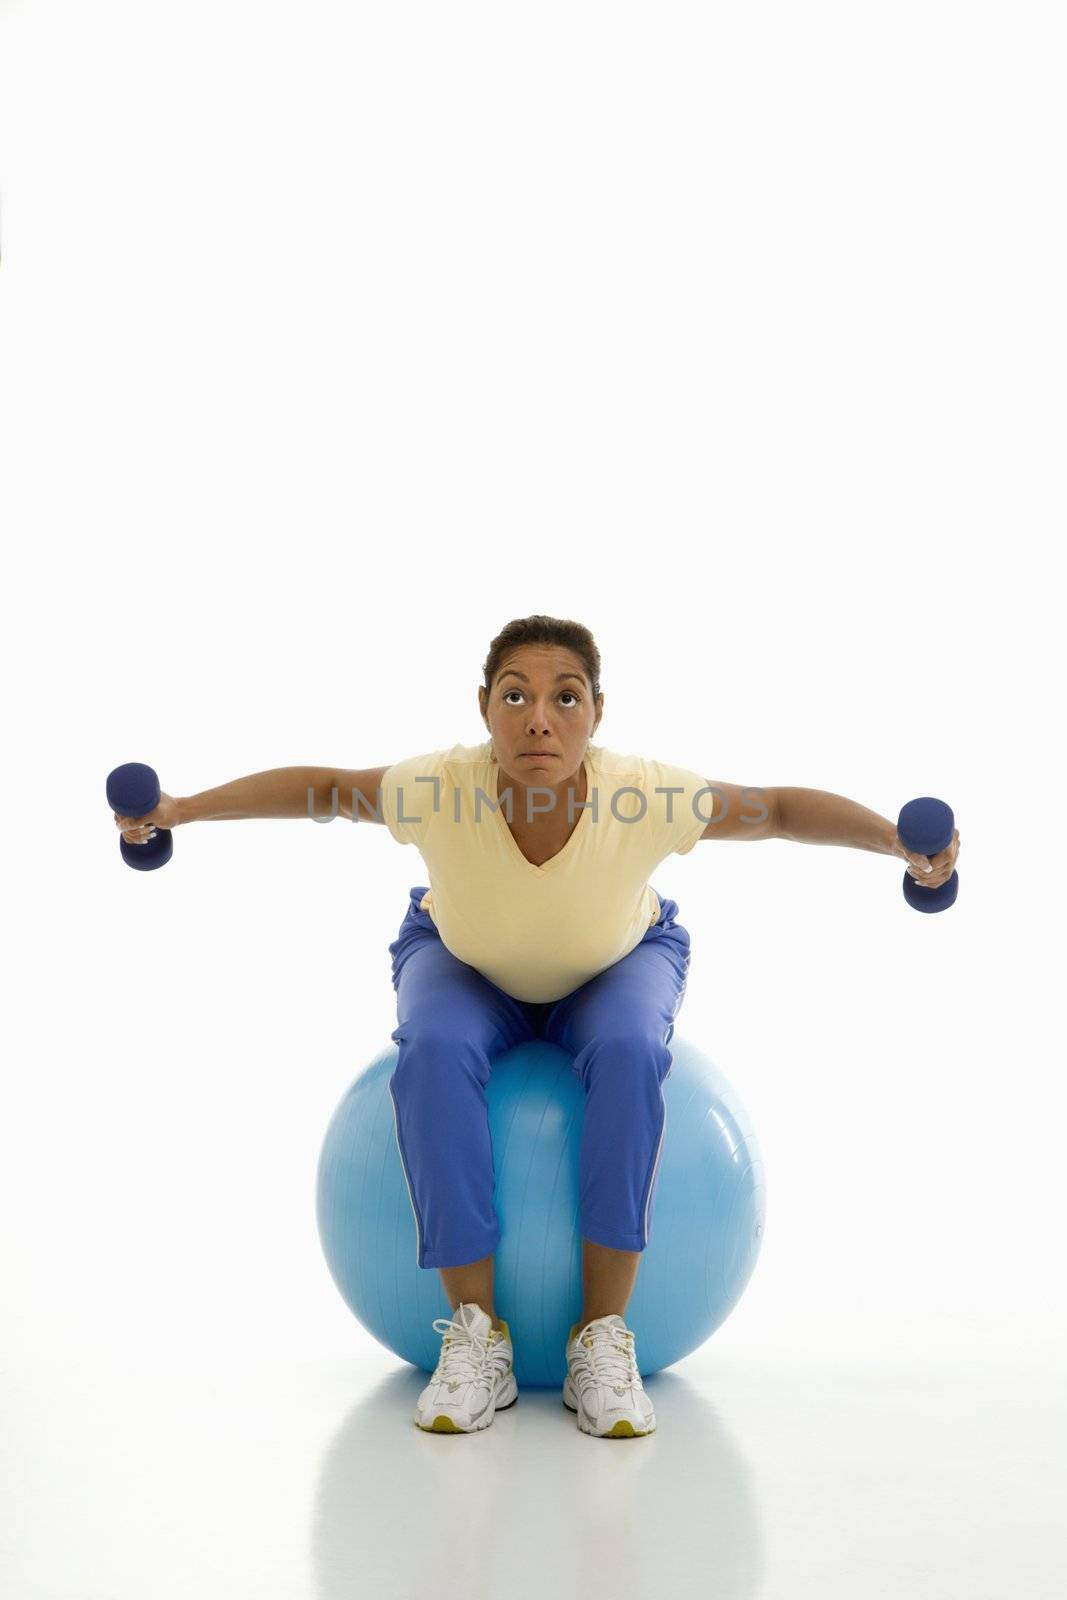 Mid adult multiethnic woman balancing on blue exercise ball with outstretched arms holding dumbbells.